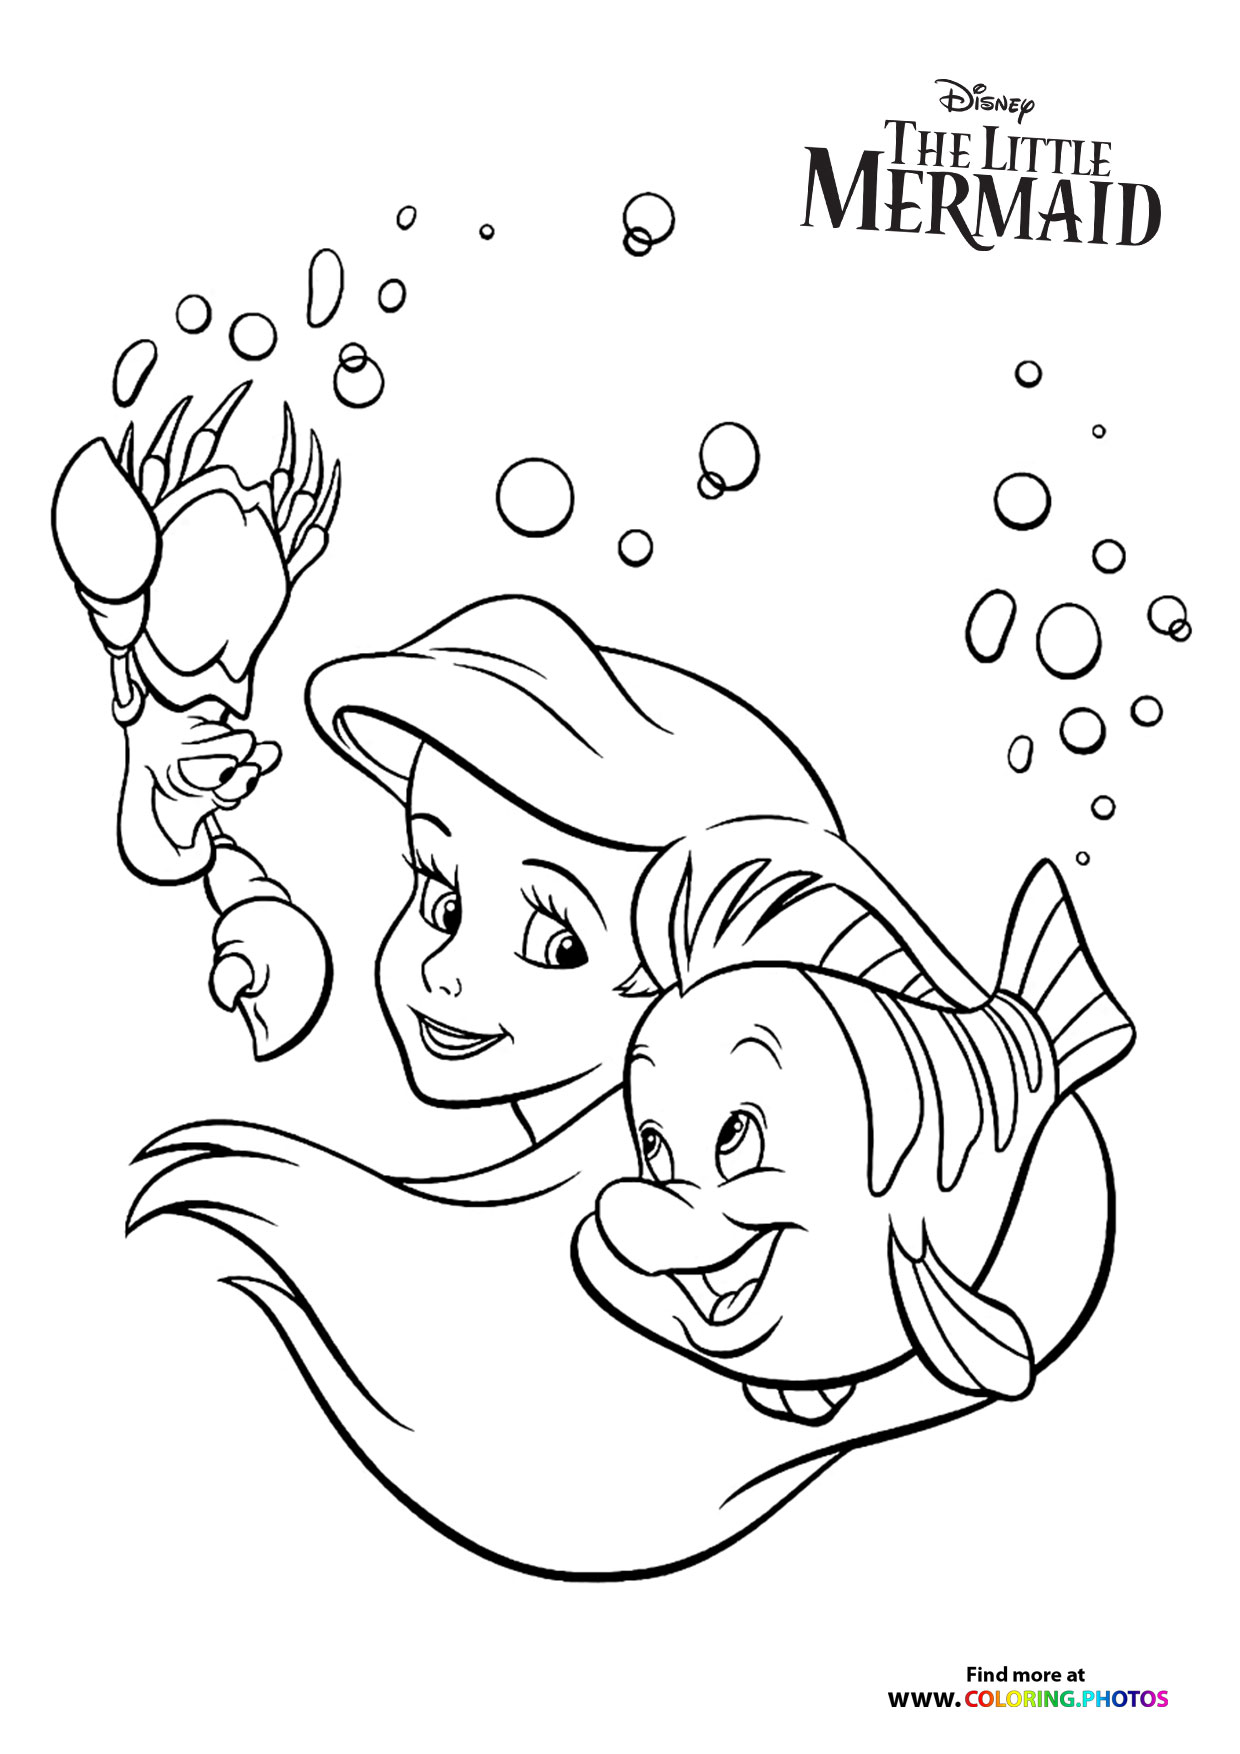 The little mermaid pages free and easy print or download